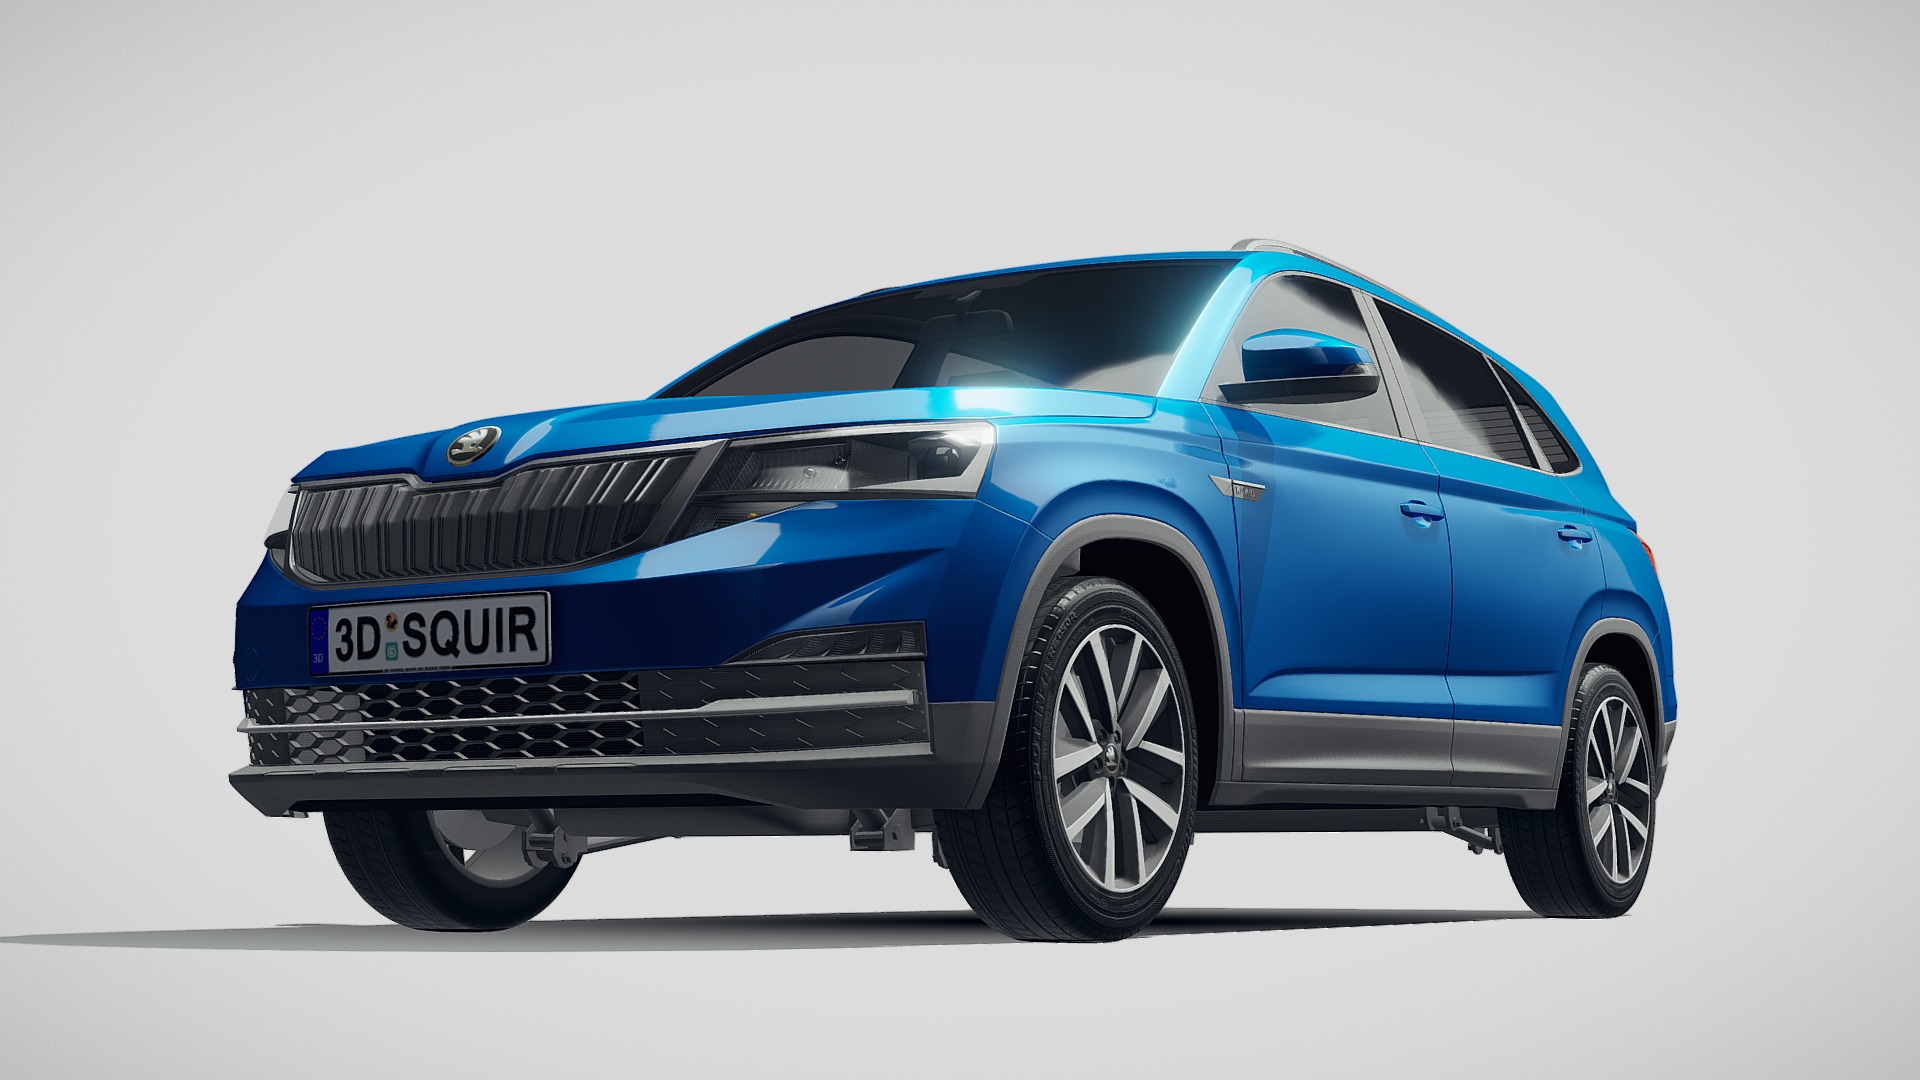 3D model Skoda Kamiq CN 2019 - This is a 3D model of the Skoda Kamiq CN 2019. The 3D model is about a blue car with a white background.